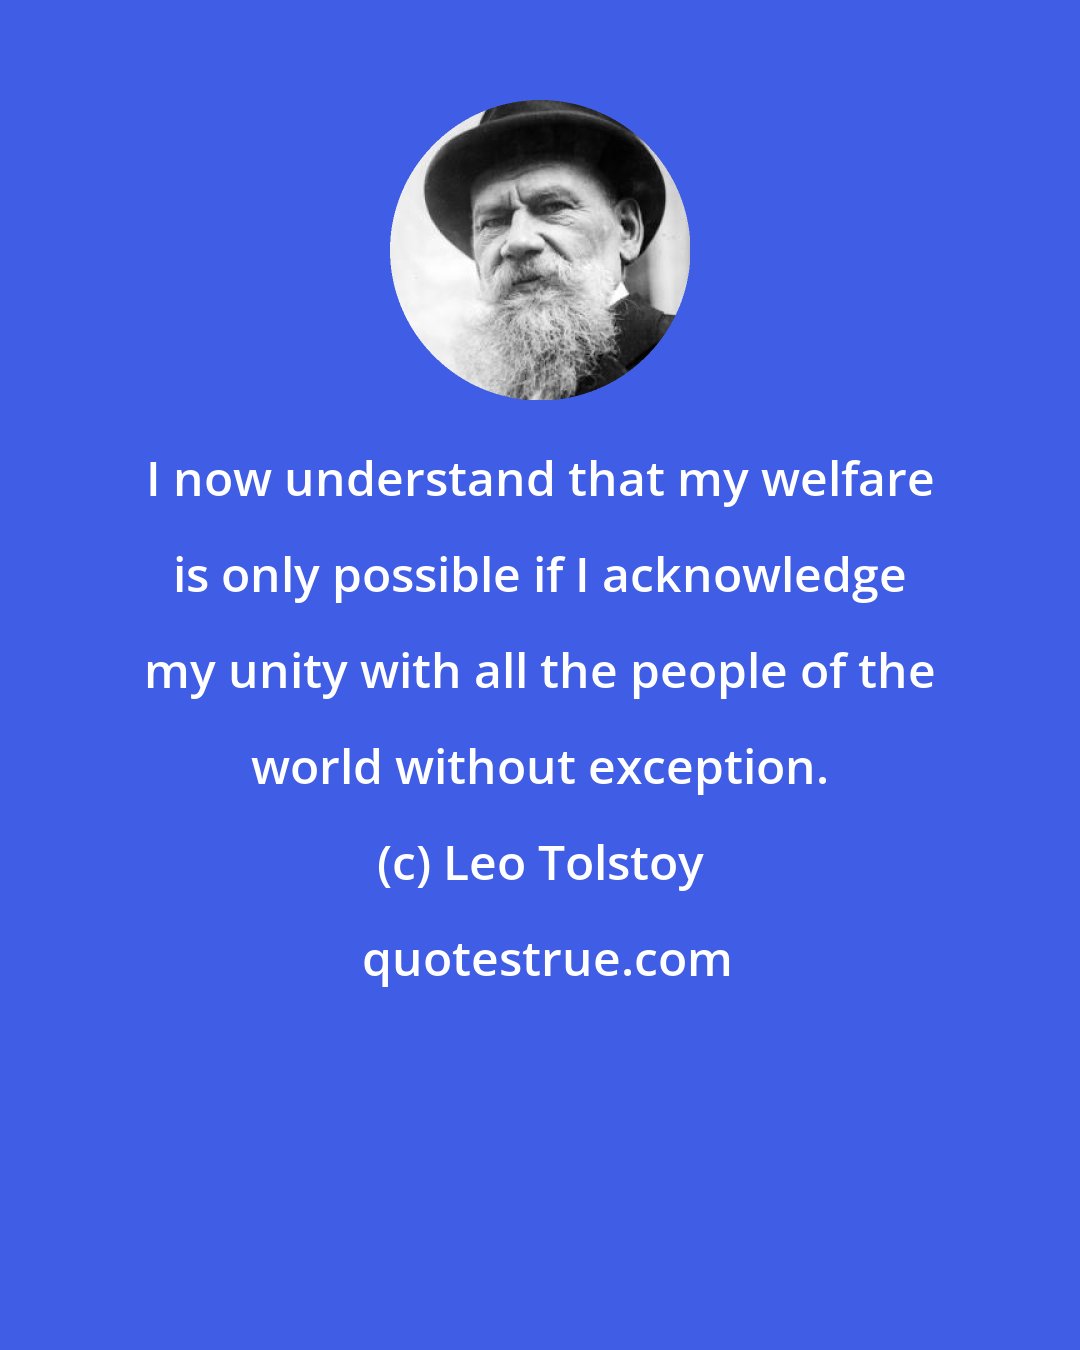 Leo Tolstoy: I now understand that my welfare is only possible if I acknowledge my unity with all the people of the world without exception.